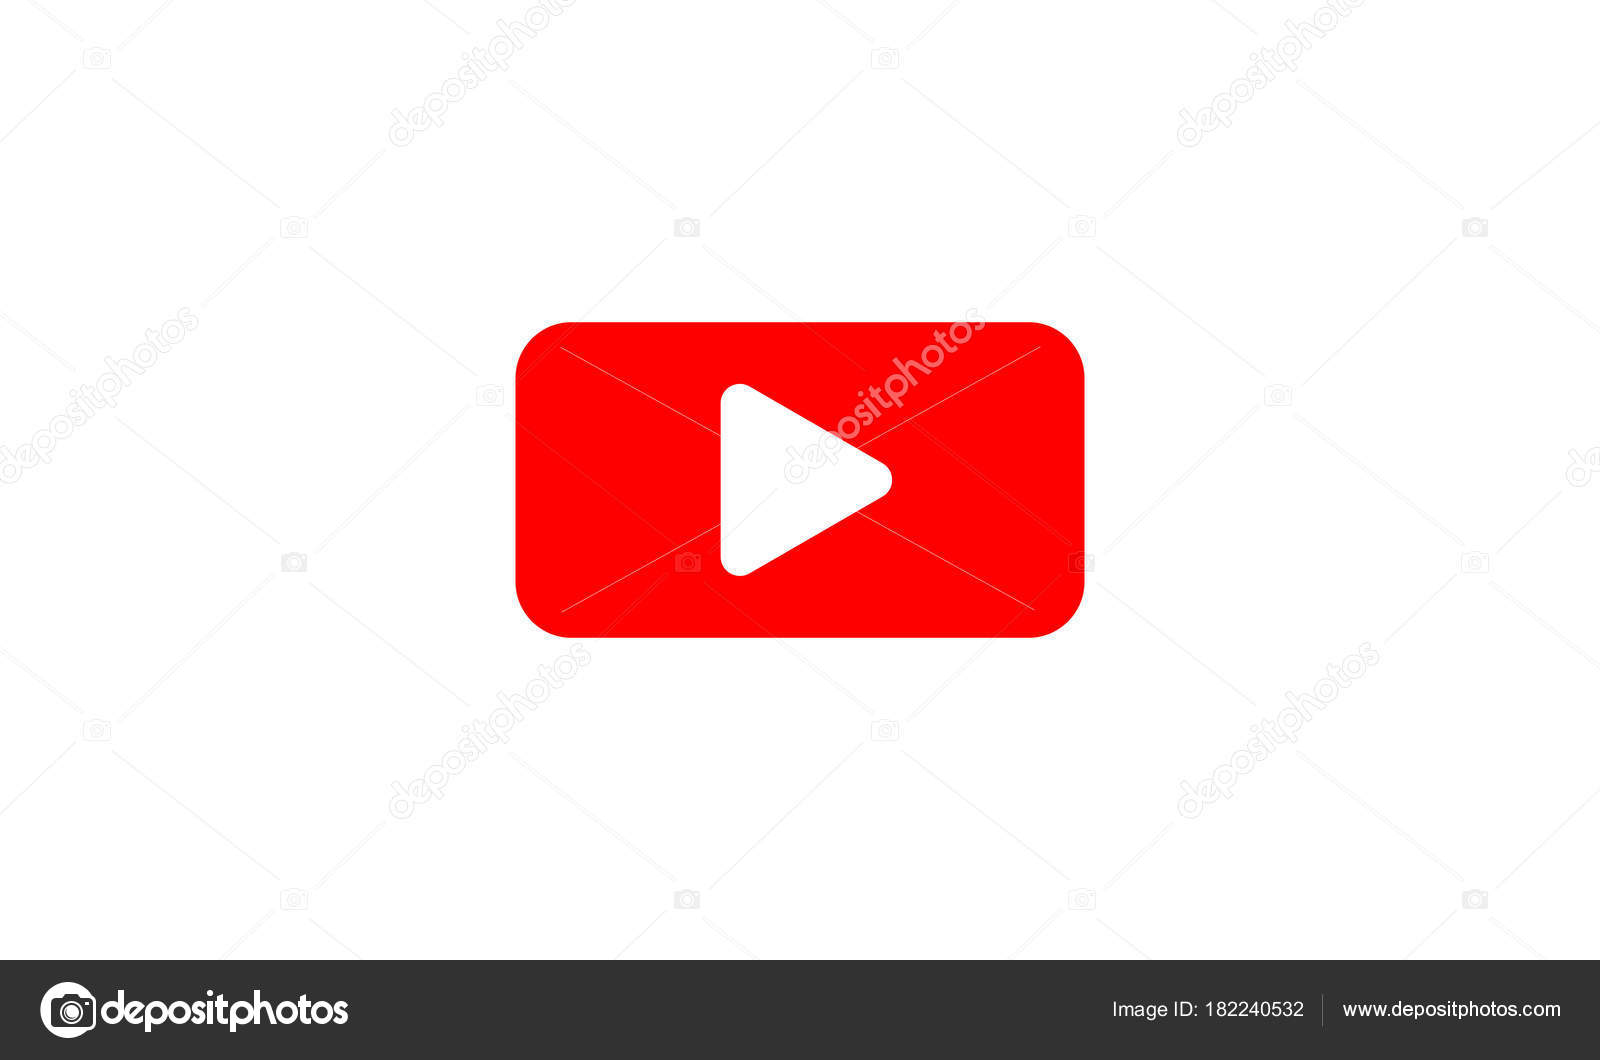 Bootstrap Font Awesome Brands Youtube Square Icon  Style: Flat 